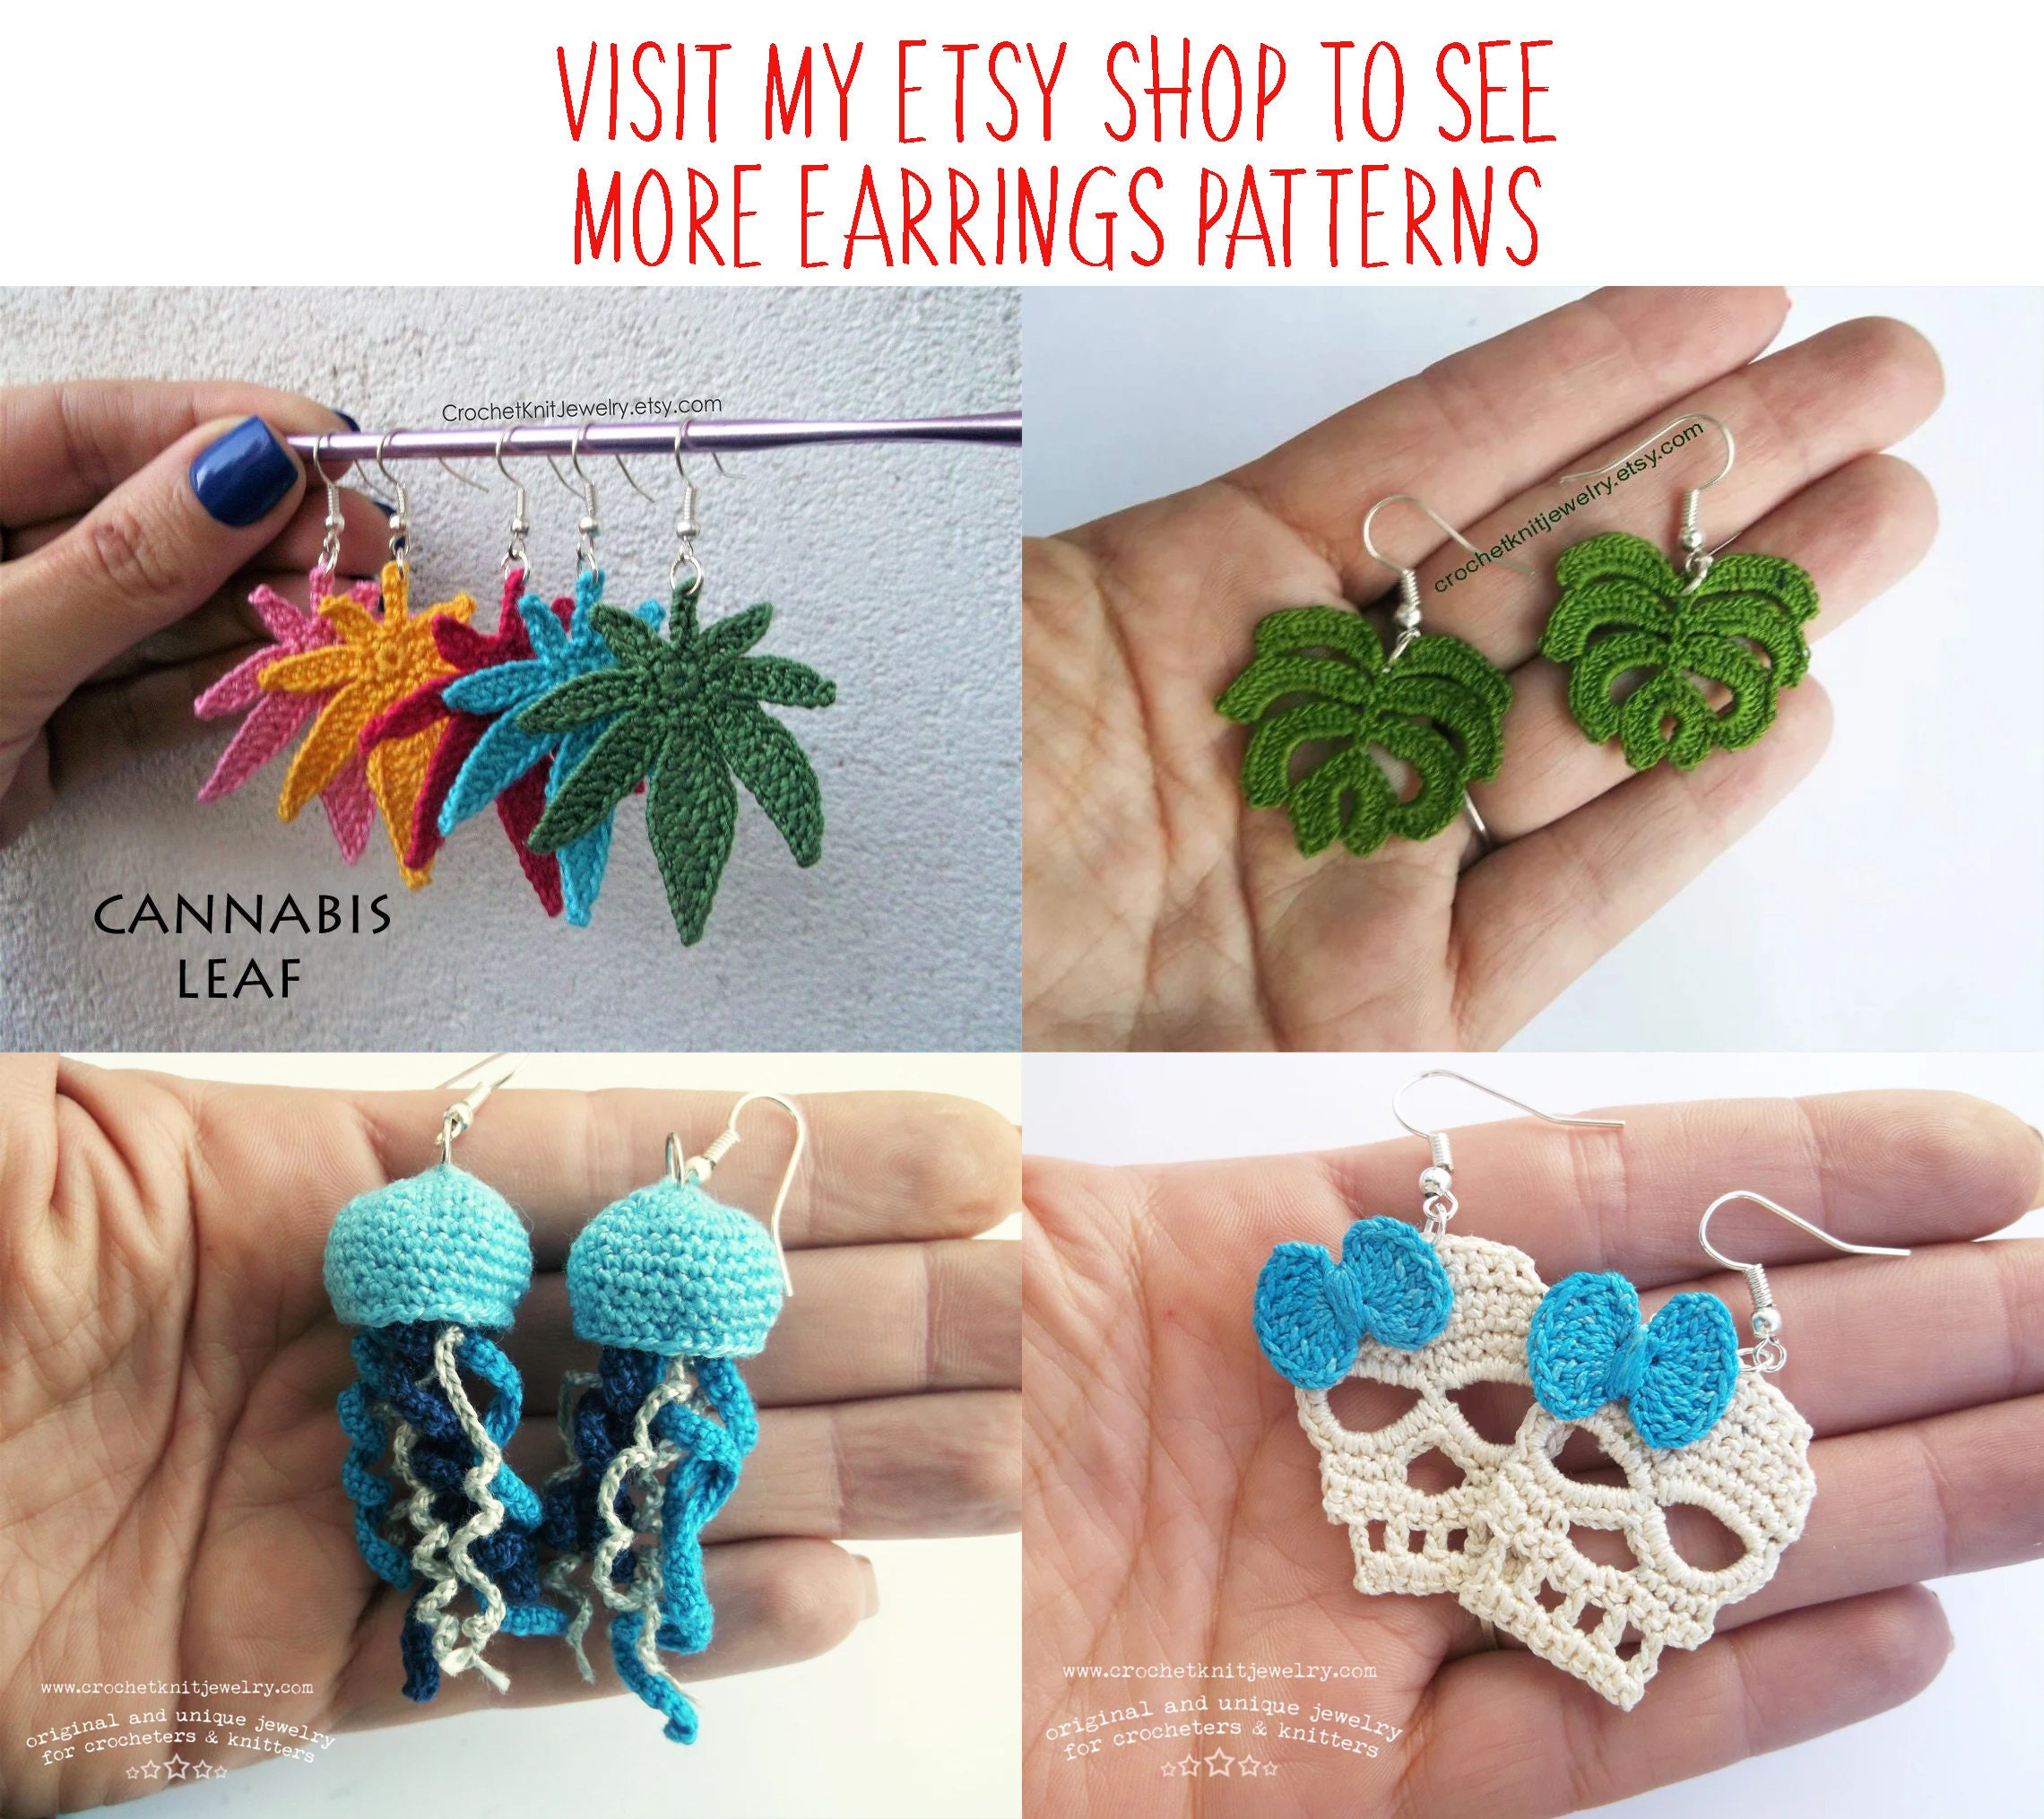 Making Crochet Earrings – What You Need to Know About Earring